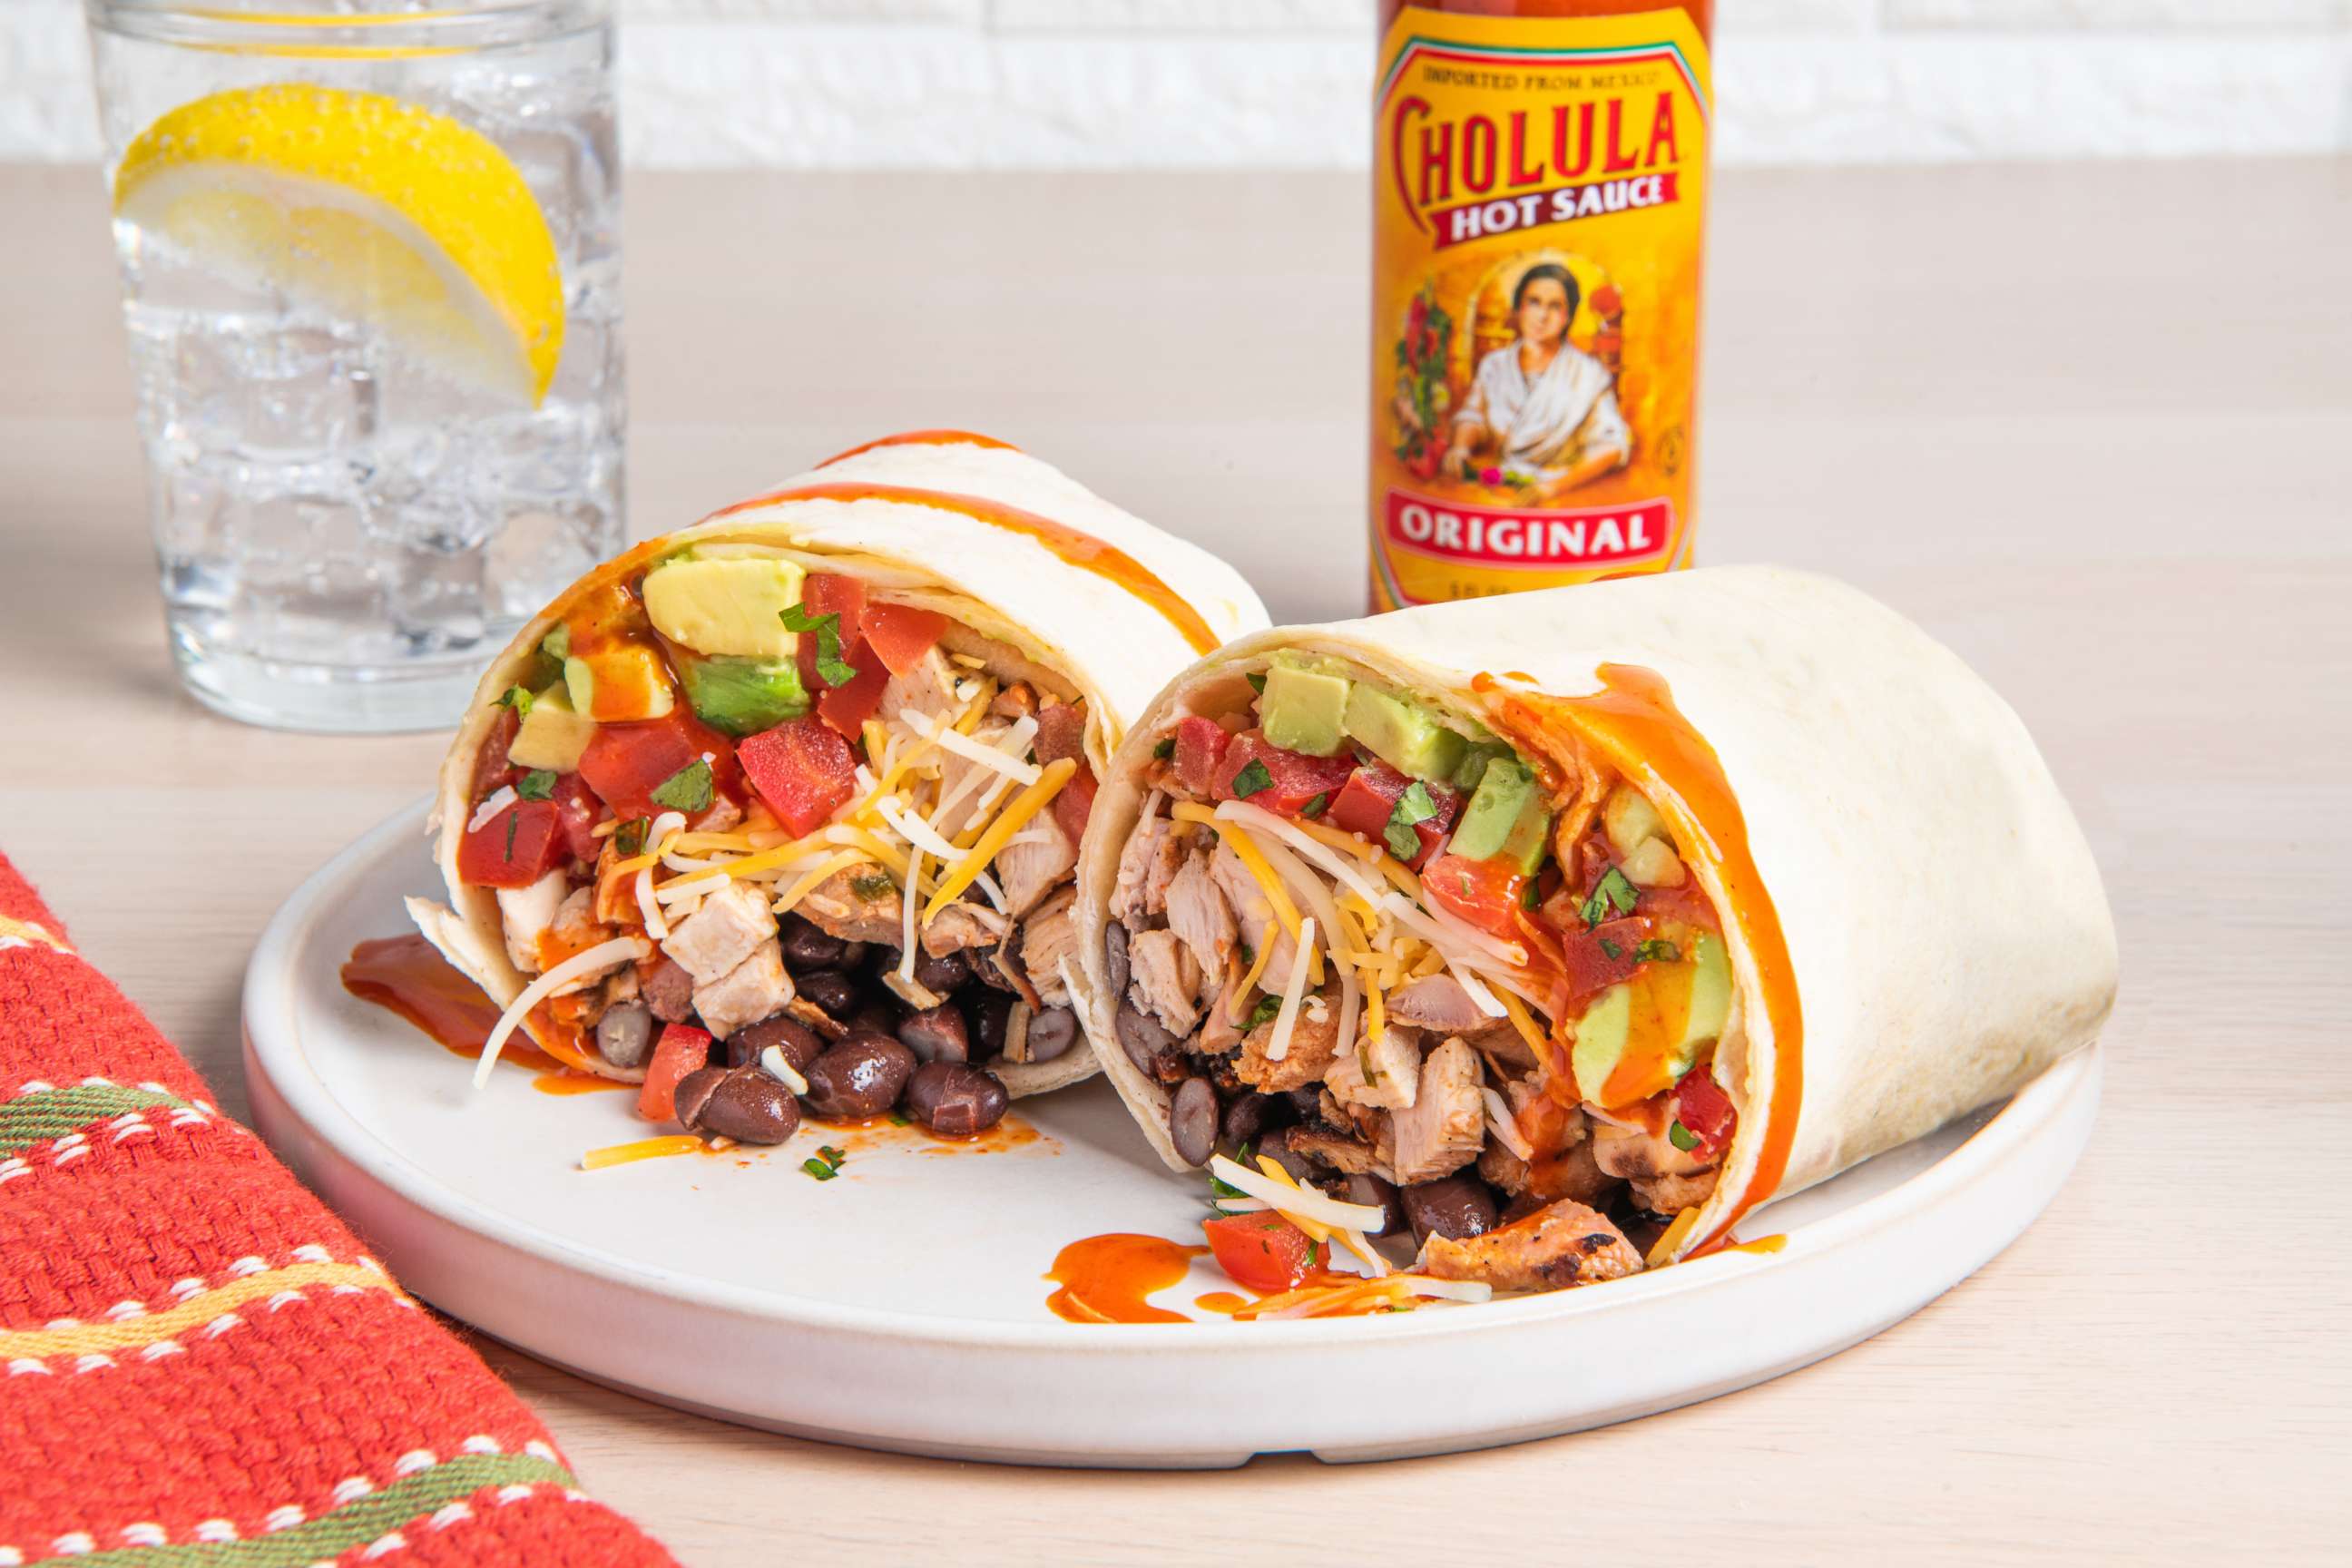 PHOTO: A chicken burrito made with Cholula hot sauce. 